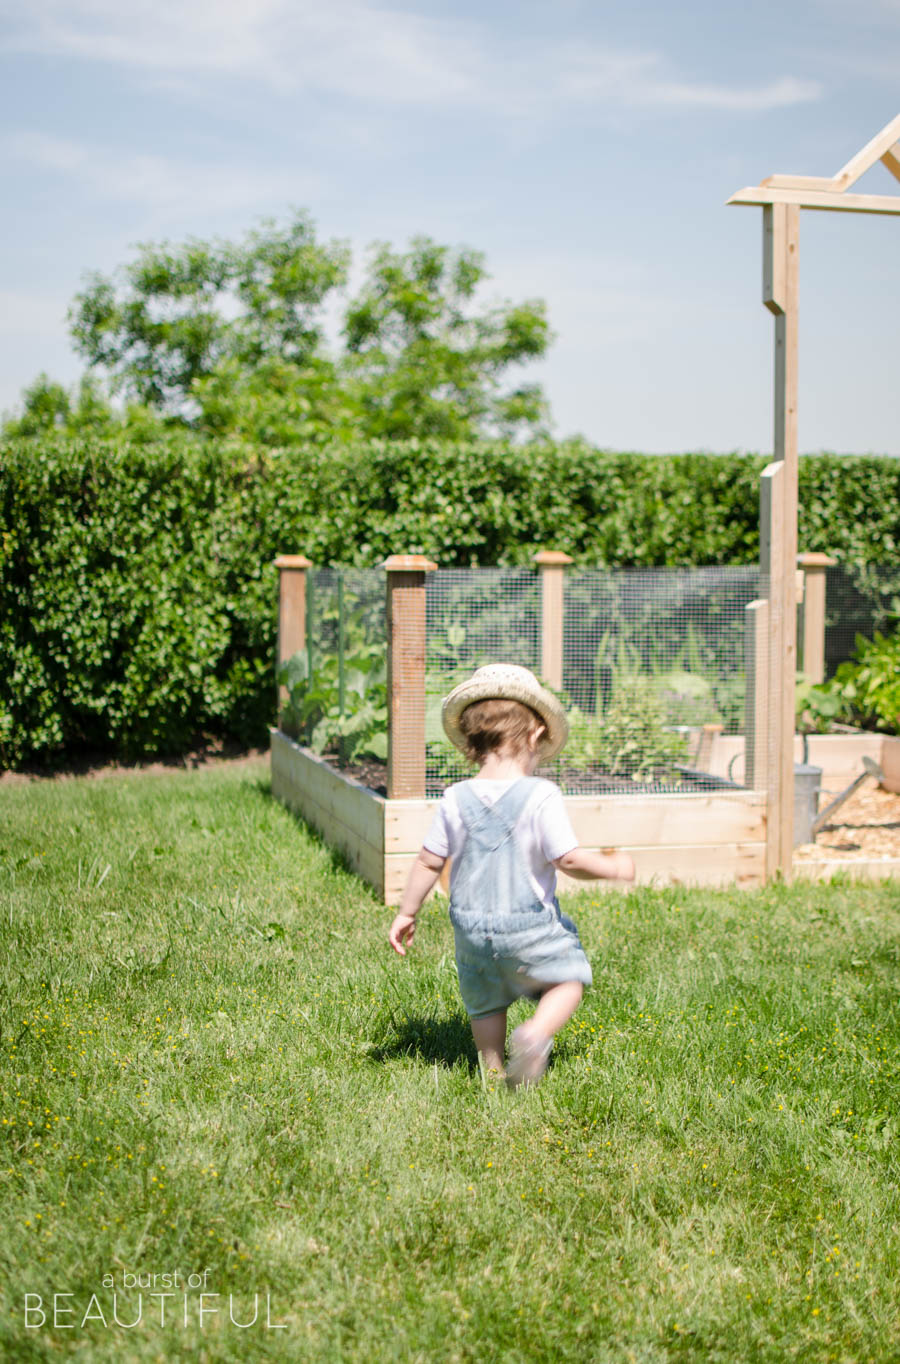 Gardening becomes fun for the whole family with a raised square foot vegetable garden | A Burst of Beautiful